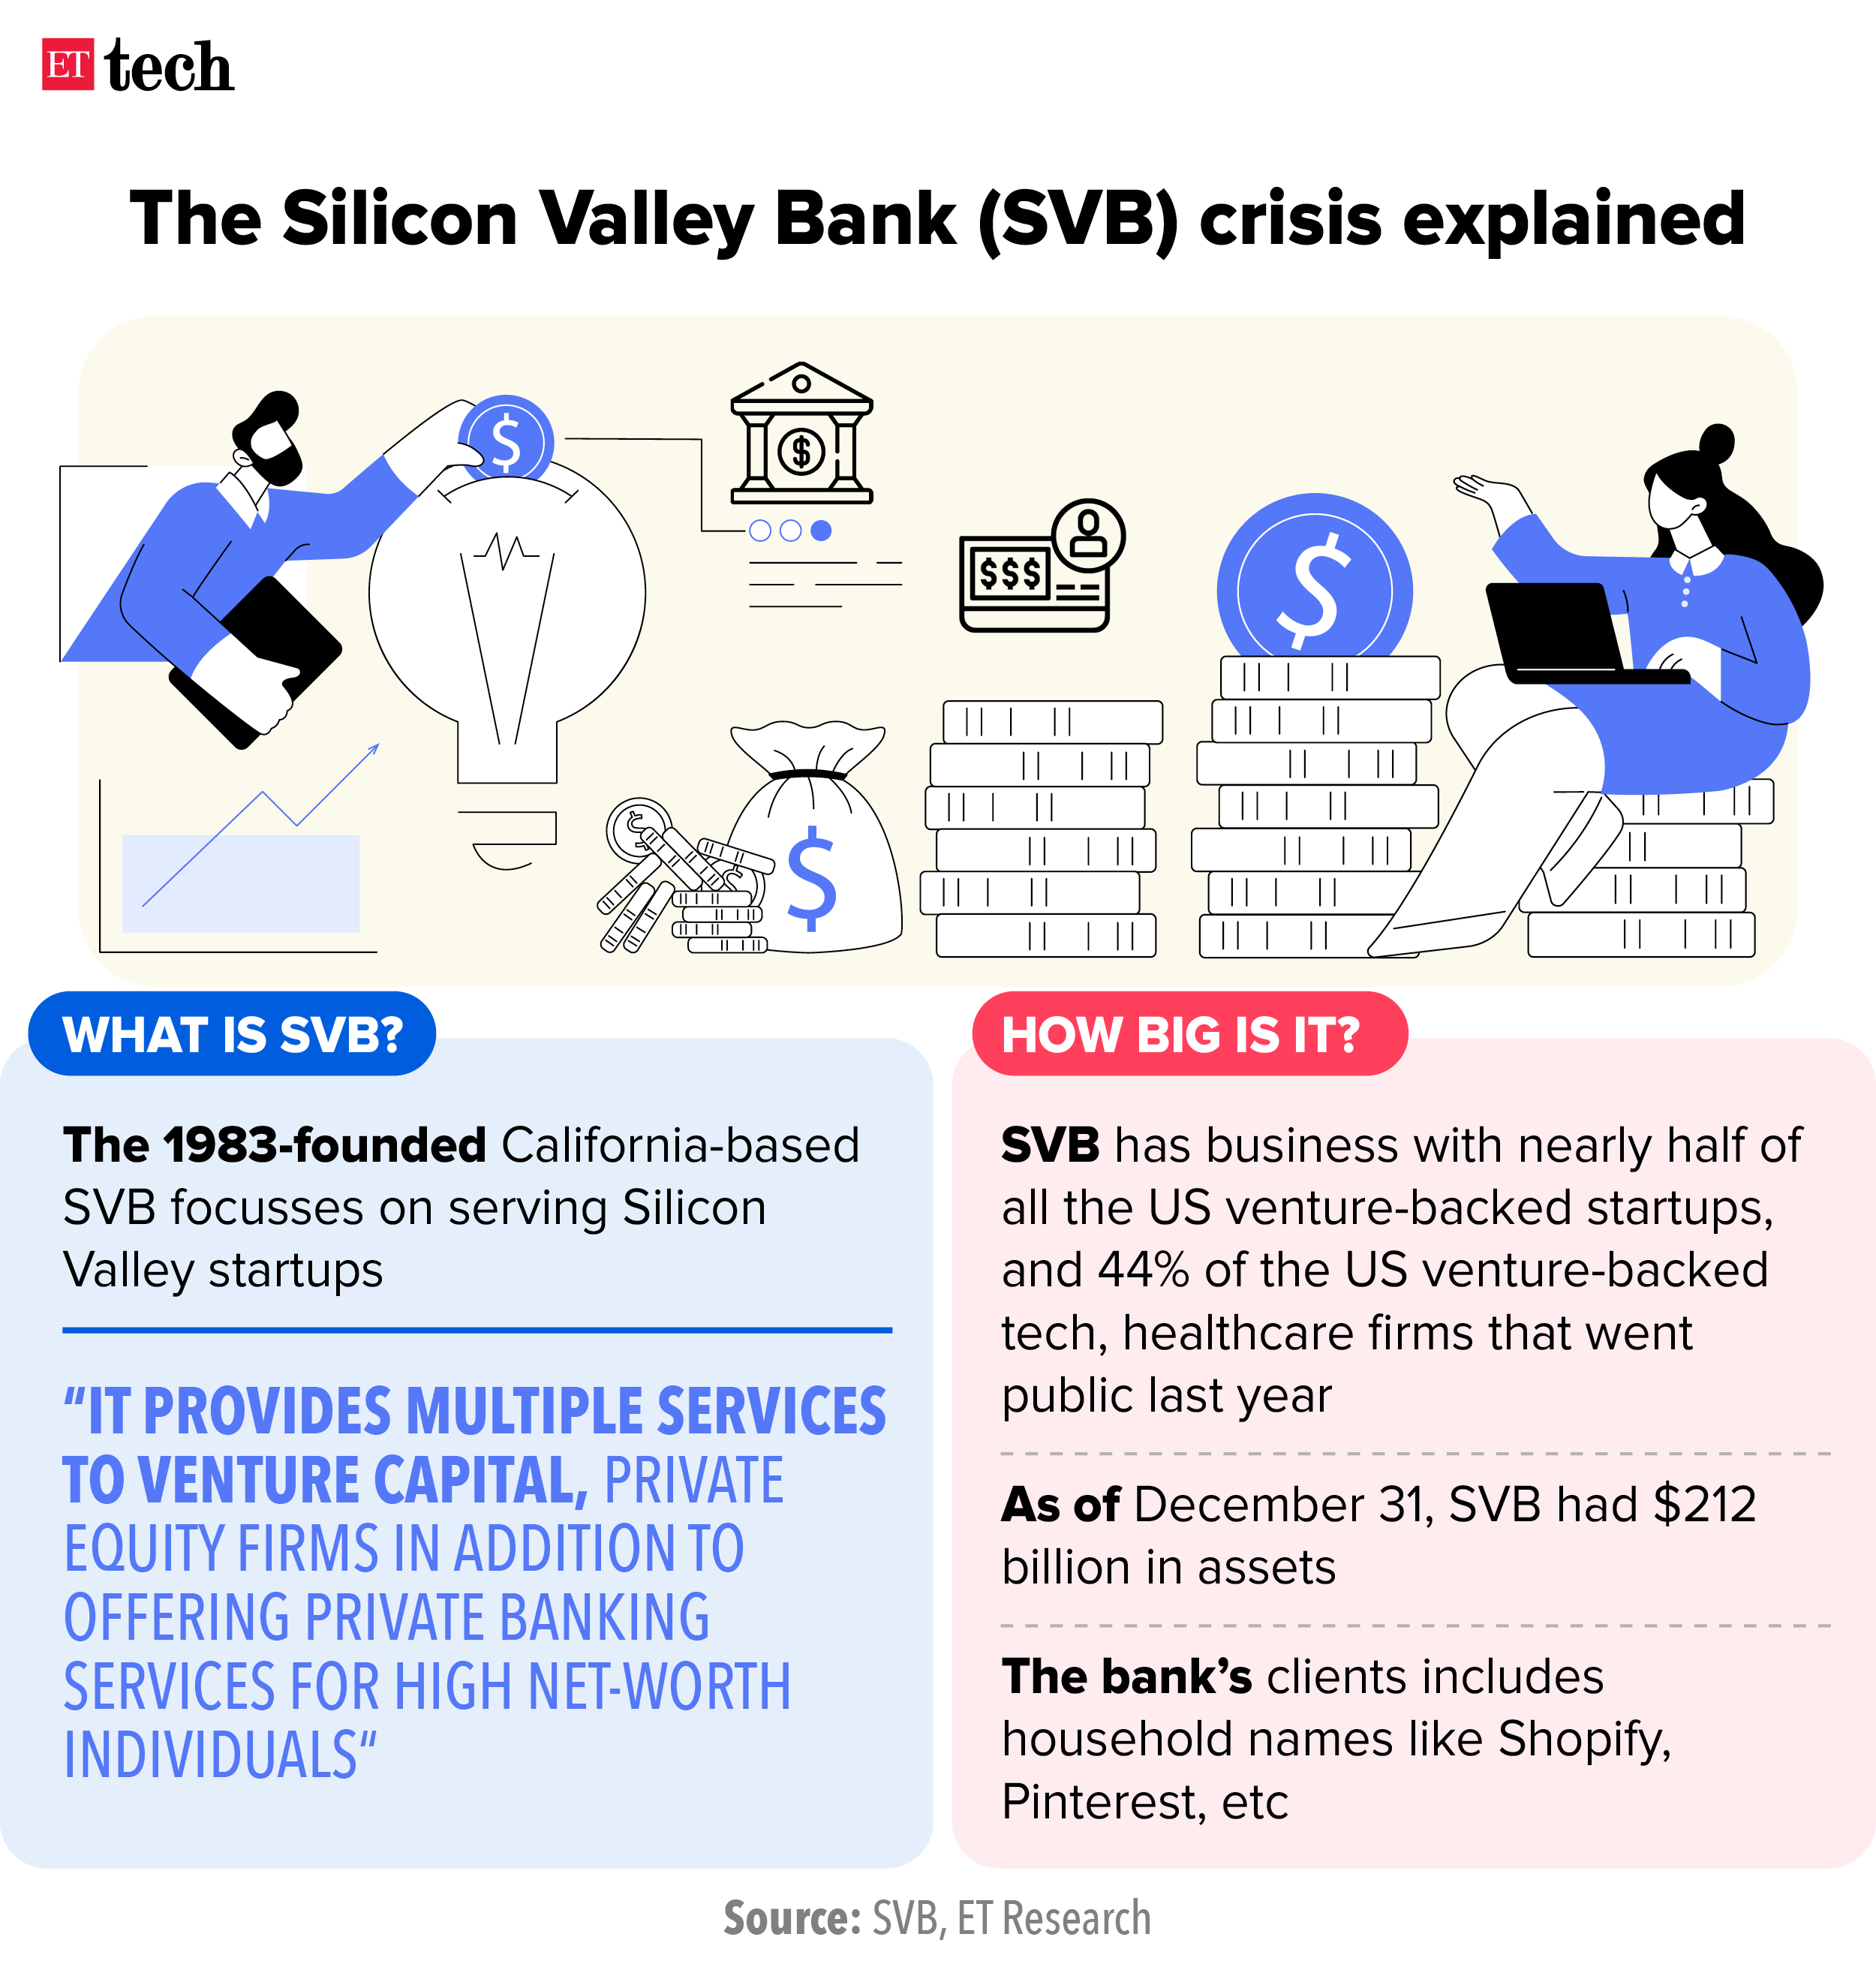 Explanation of the crisis of the Silicon Valley Bank (SVB)_Graphic_ETTECH